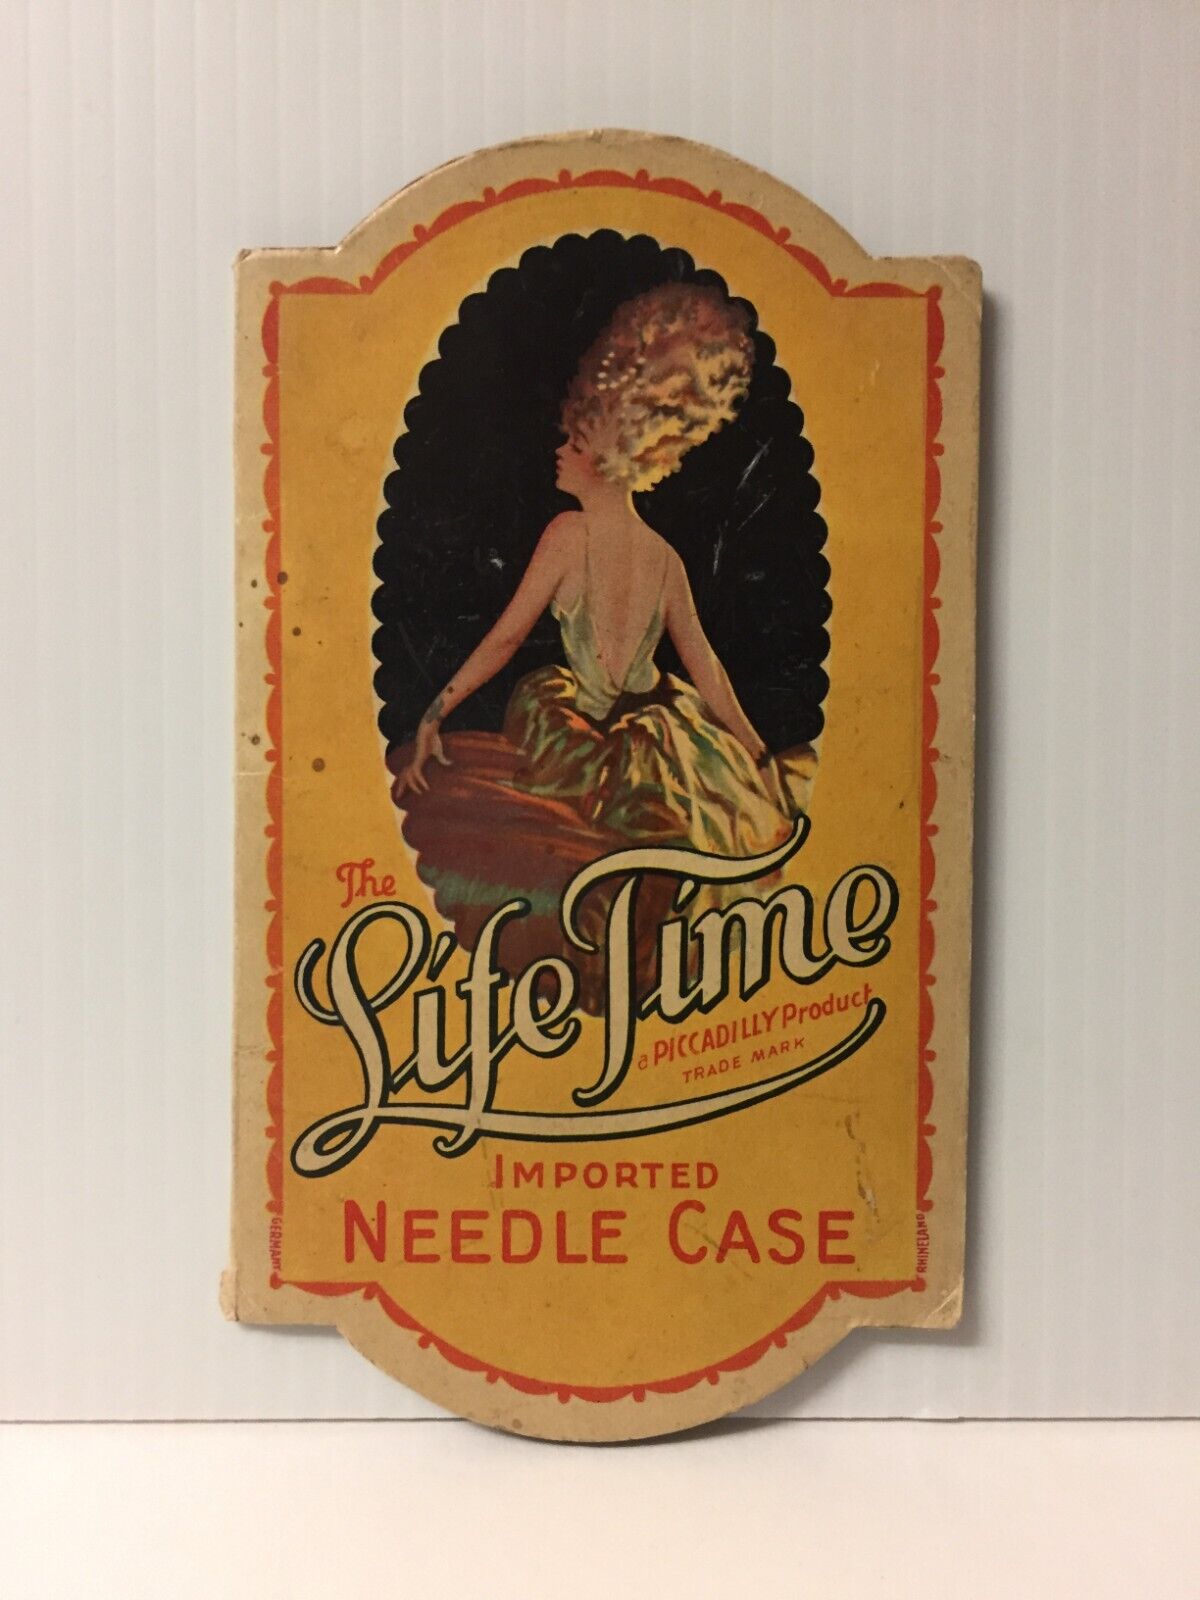 Vintage Life Time Imported Needle Case All Gold Eye Piccadilly Needles